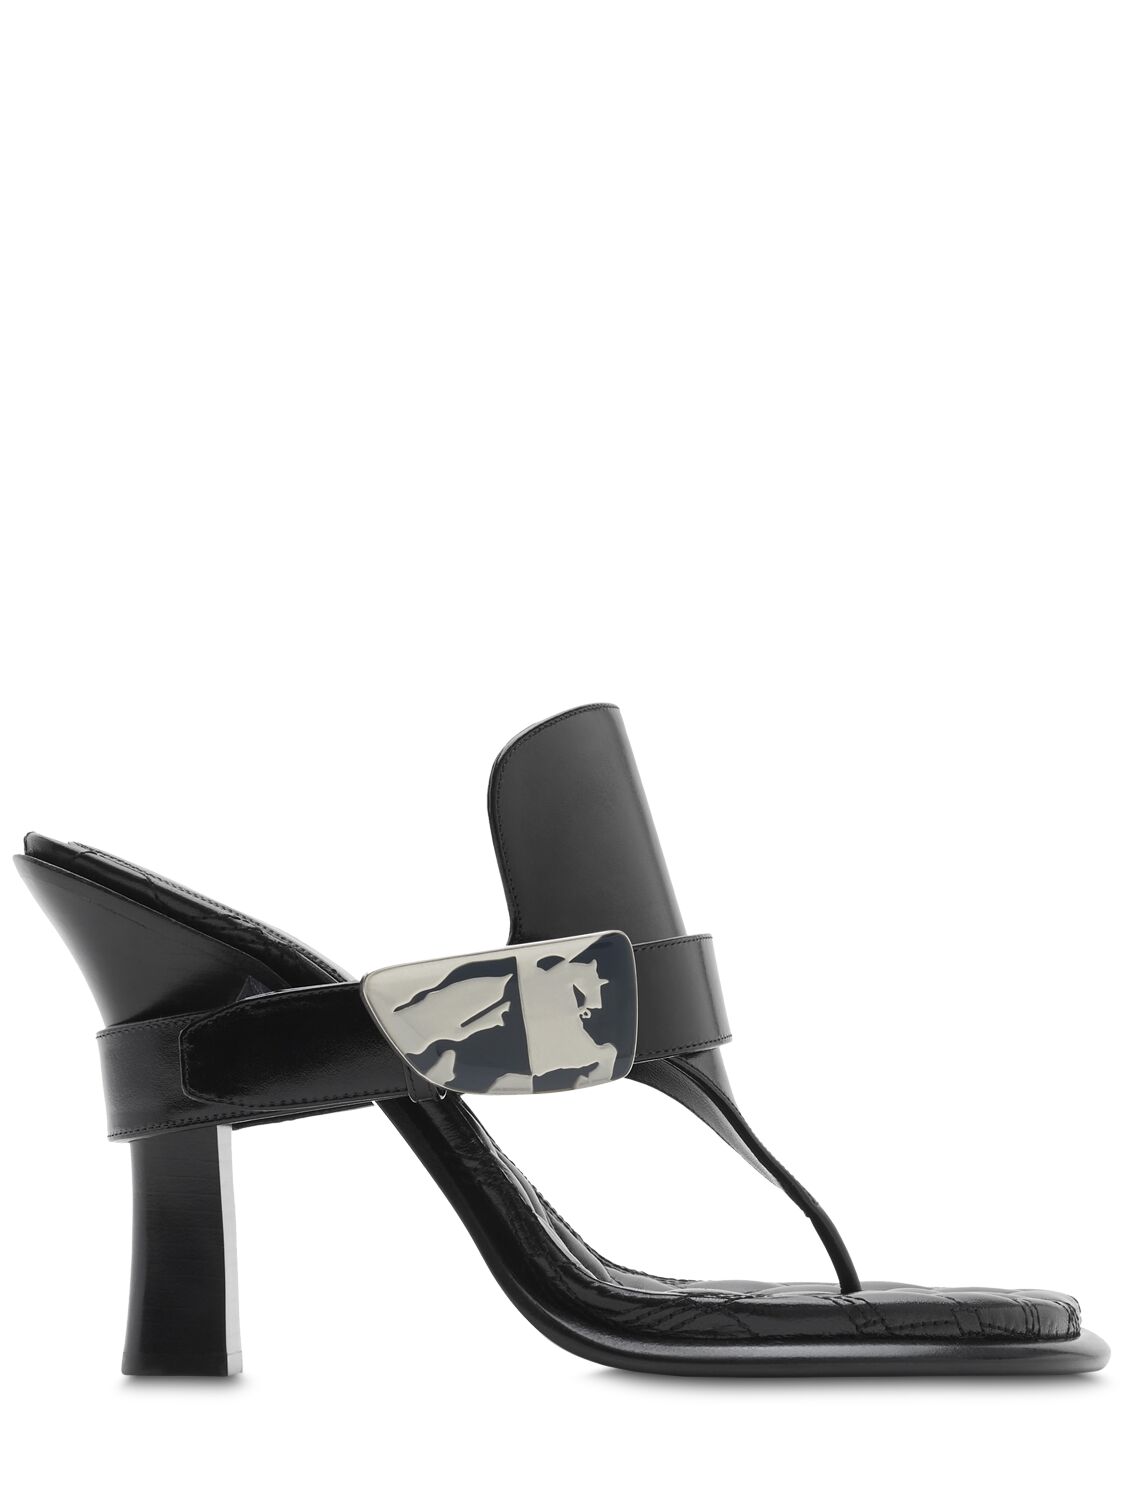 Burberry 100mm Lf Bay Leather Sandals In Black